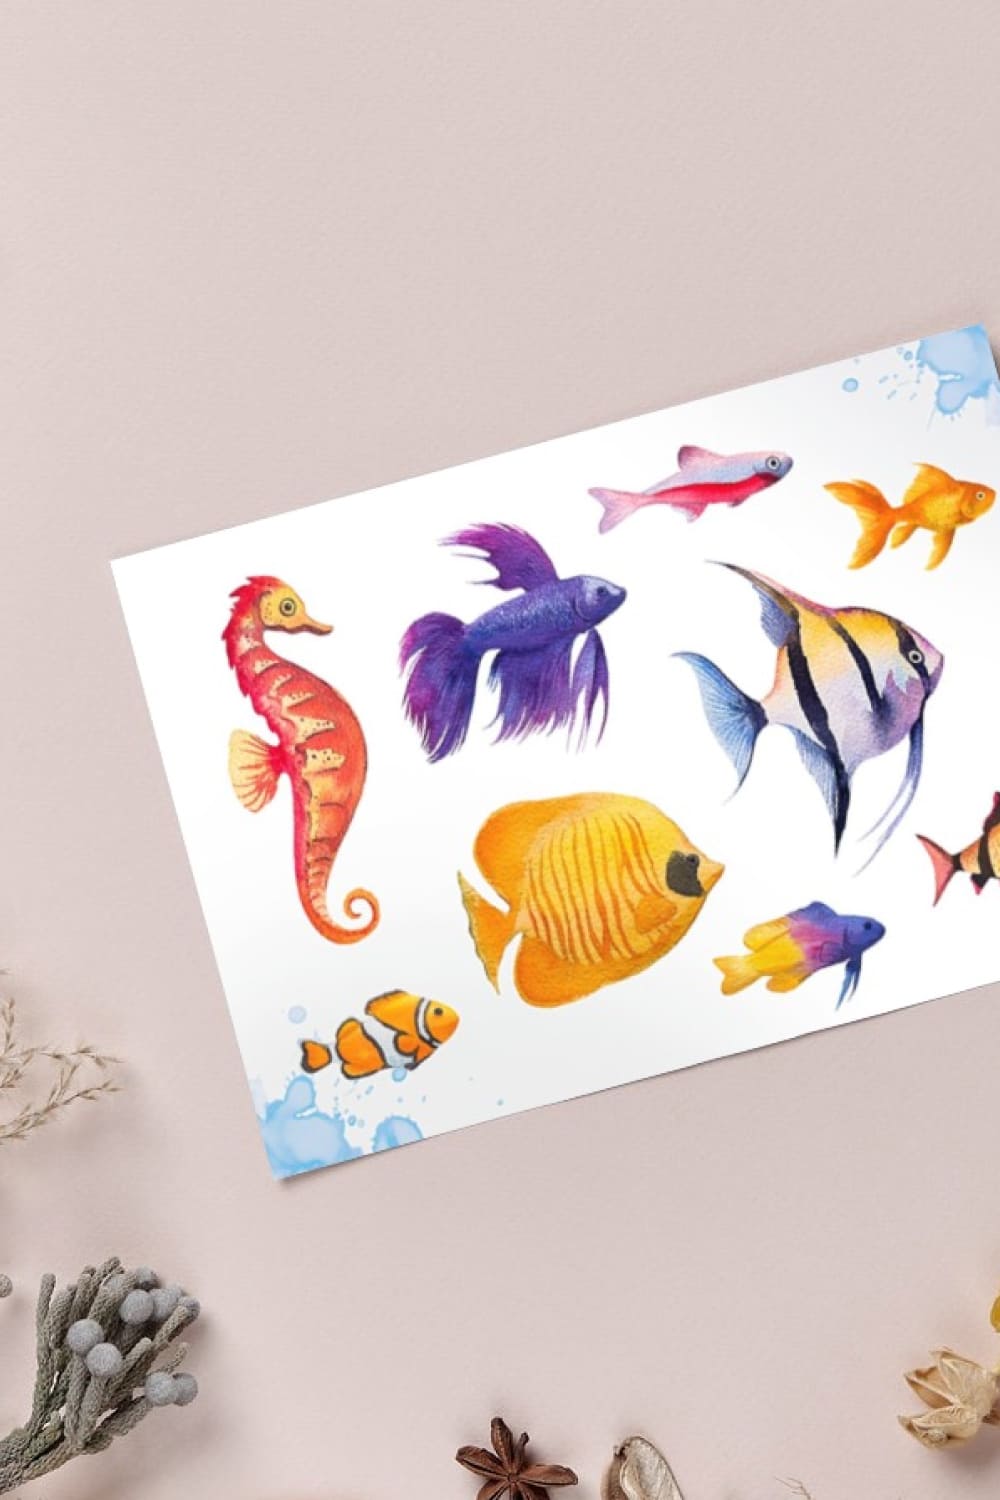 These watercolor fish illustrations are ideal for posters.